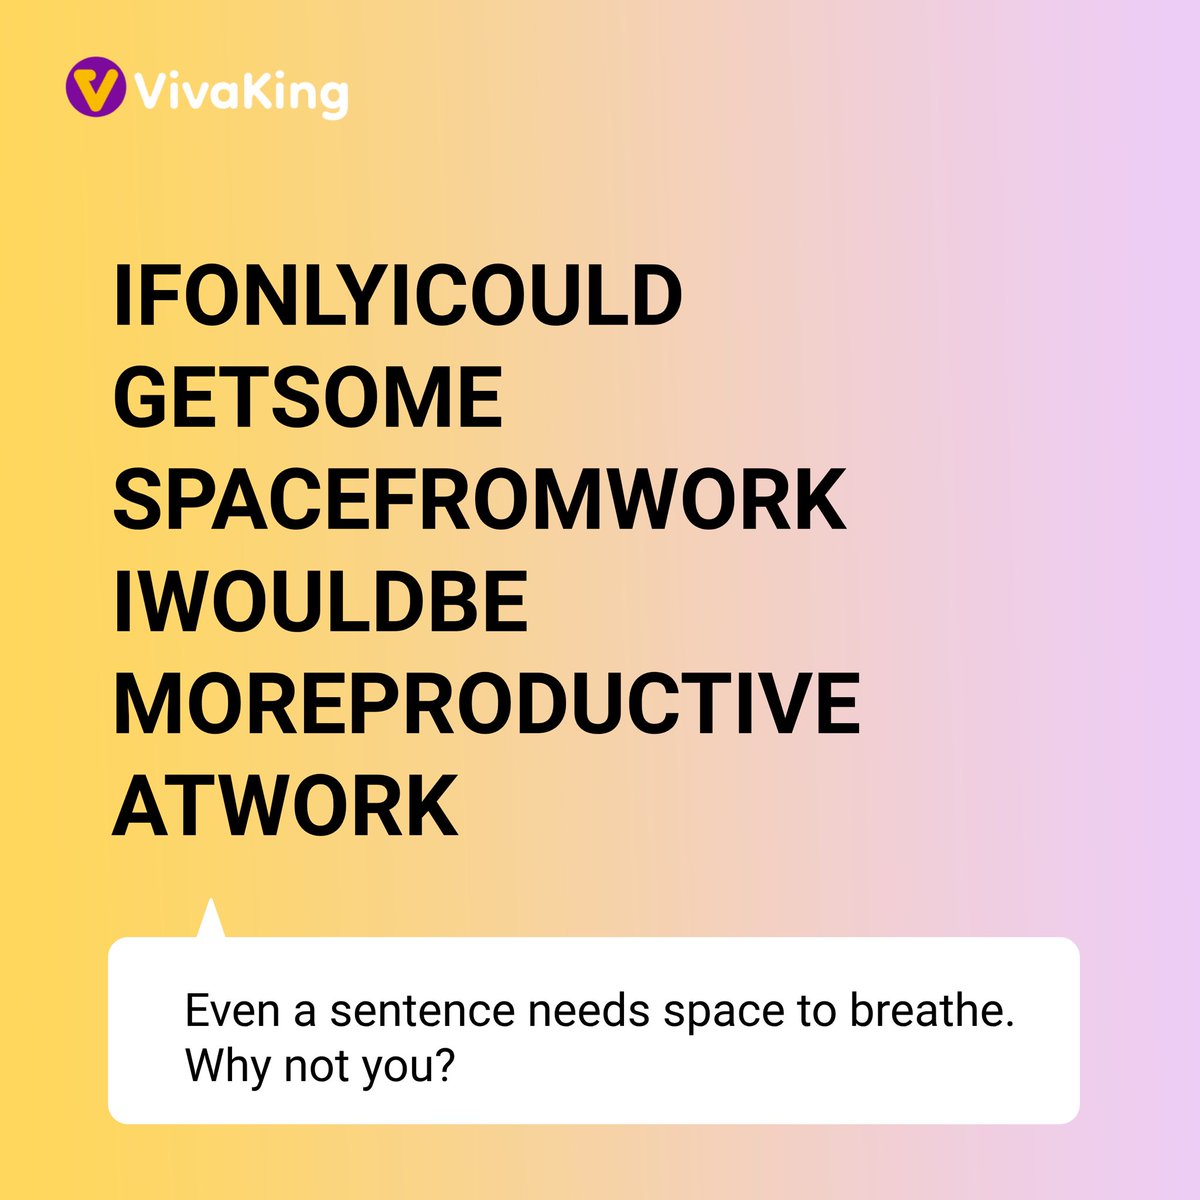 Give yourself the room you need to breathe and grow. If you are taking any of our courses, please take breaks away from the computer from time to time. If you don't take breaks, it will have an impact on you. Please take breaks.

#VivaKing #MentalHealth #TechCourses #OnlineCourse